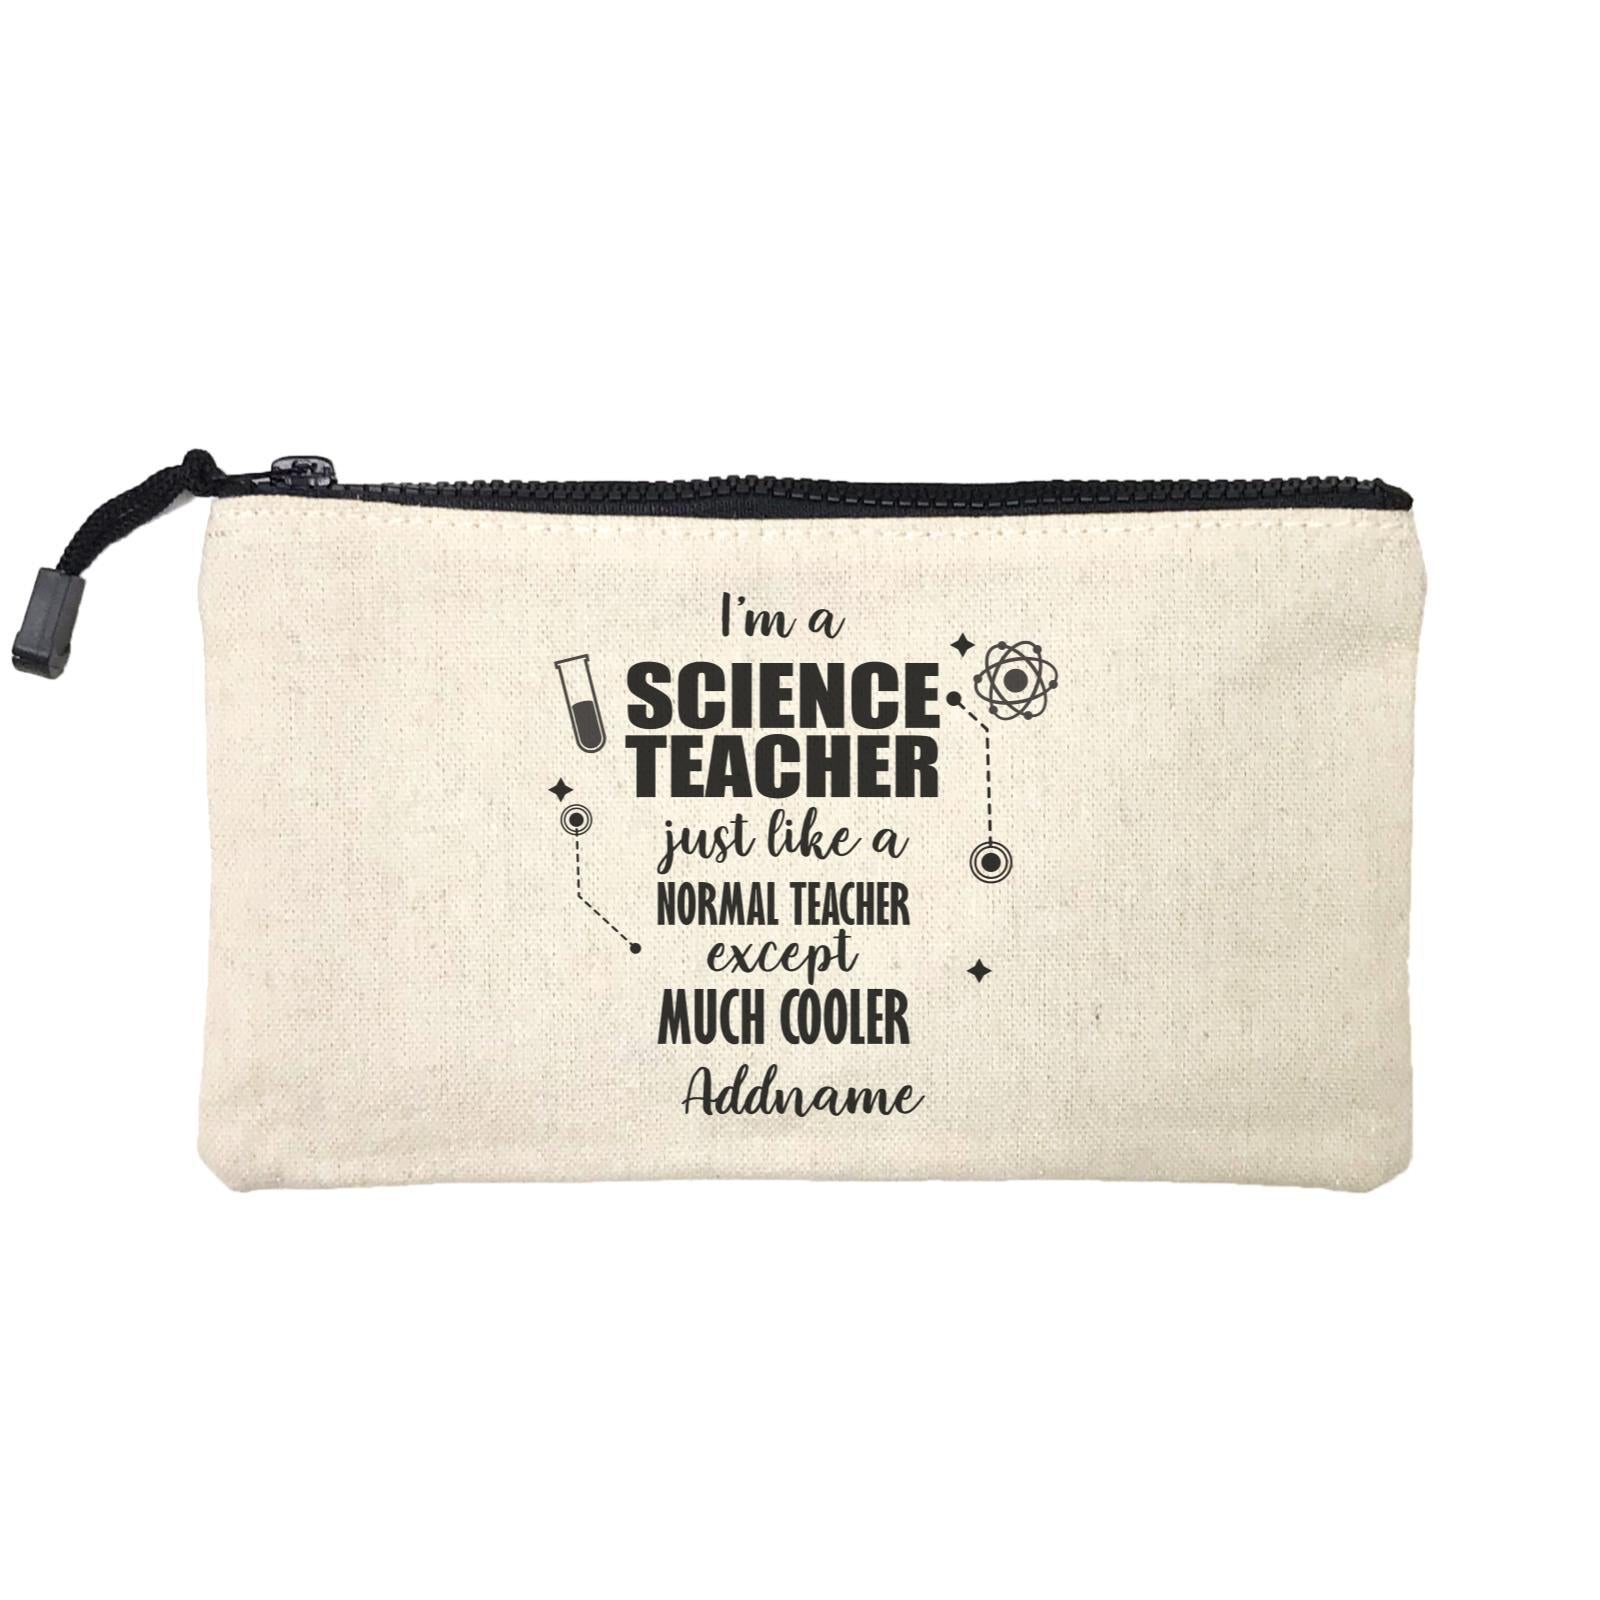 Subject Teachers 1 I'm A Science Teacher Addname Mini Accessories Stationery Pouch